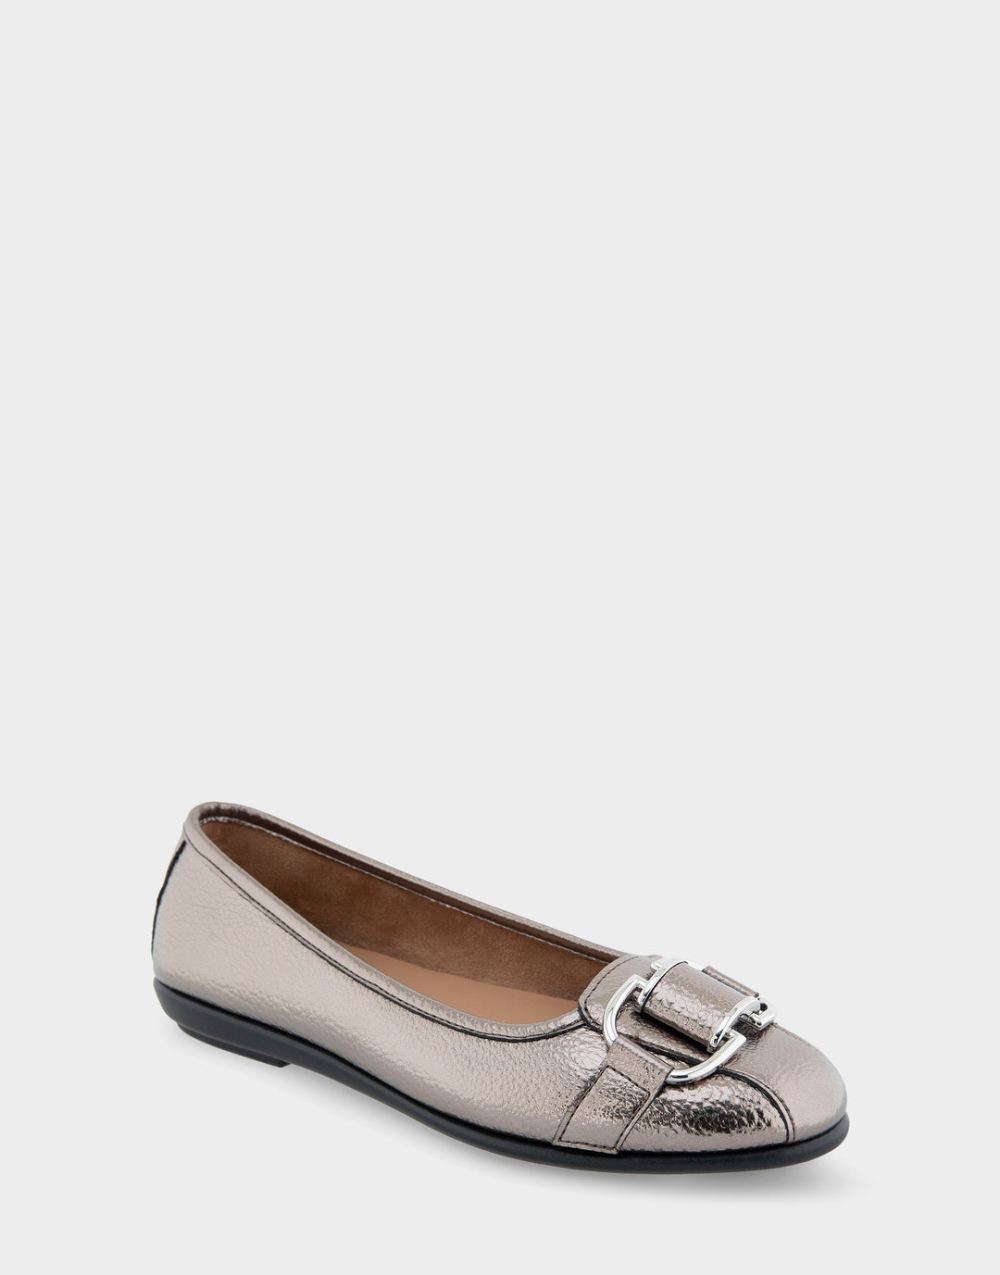 Women's | Bentley Pewter Faux Leather Ornamented Flat